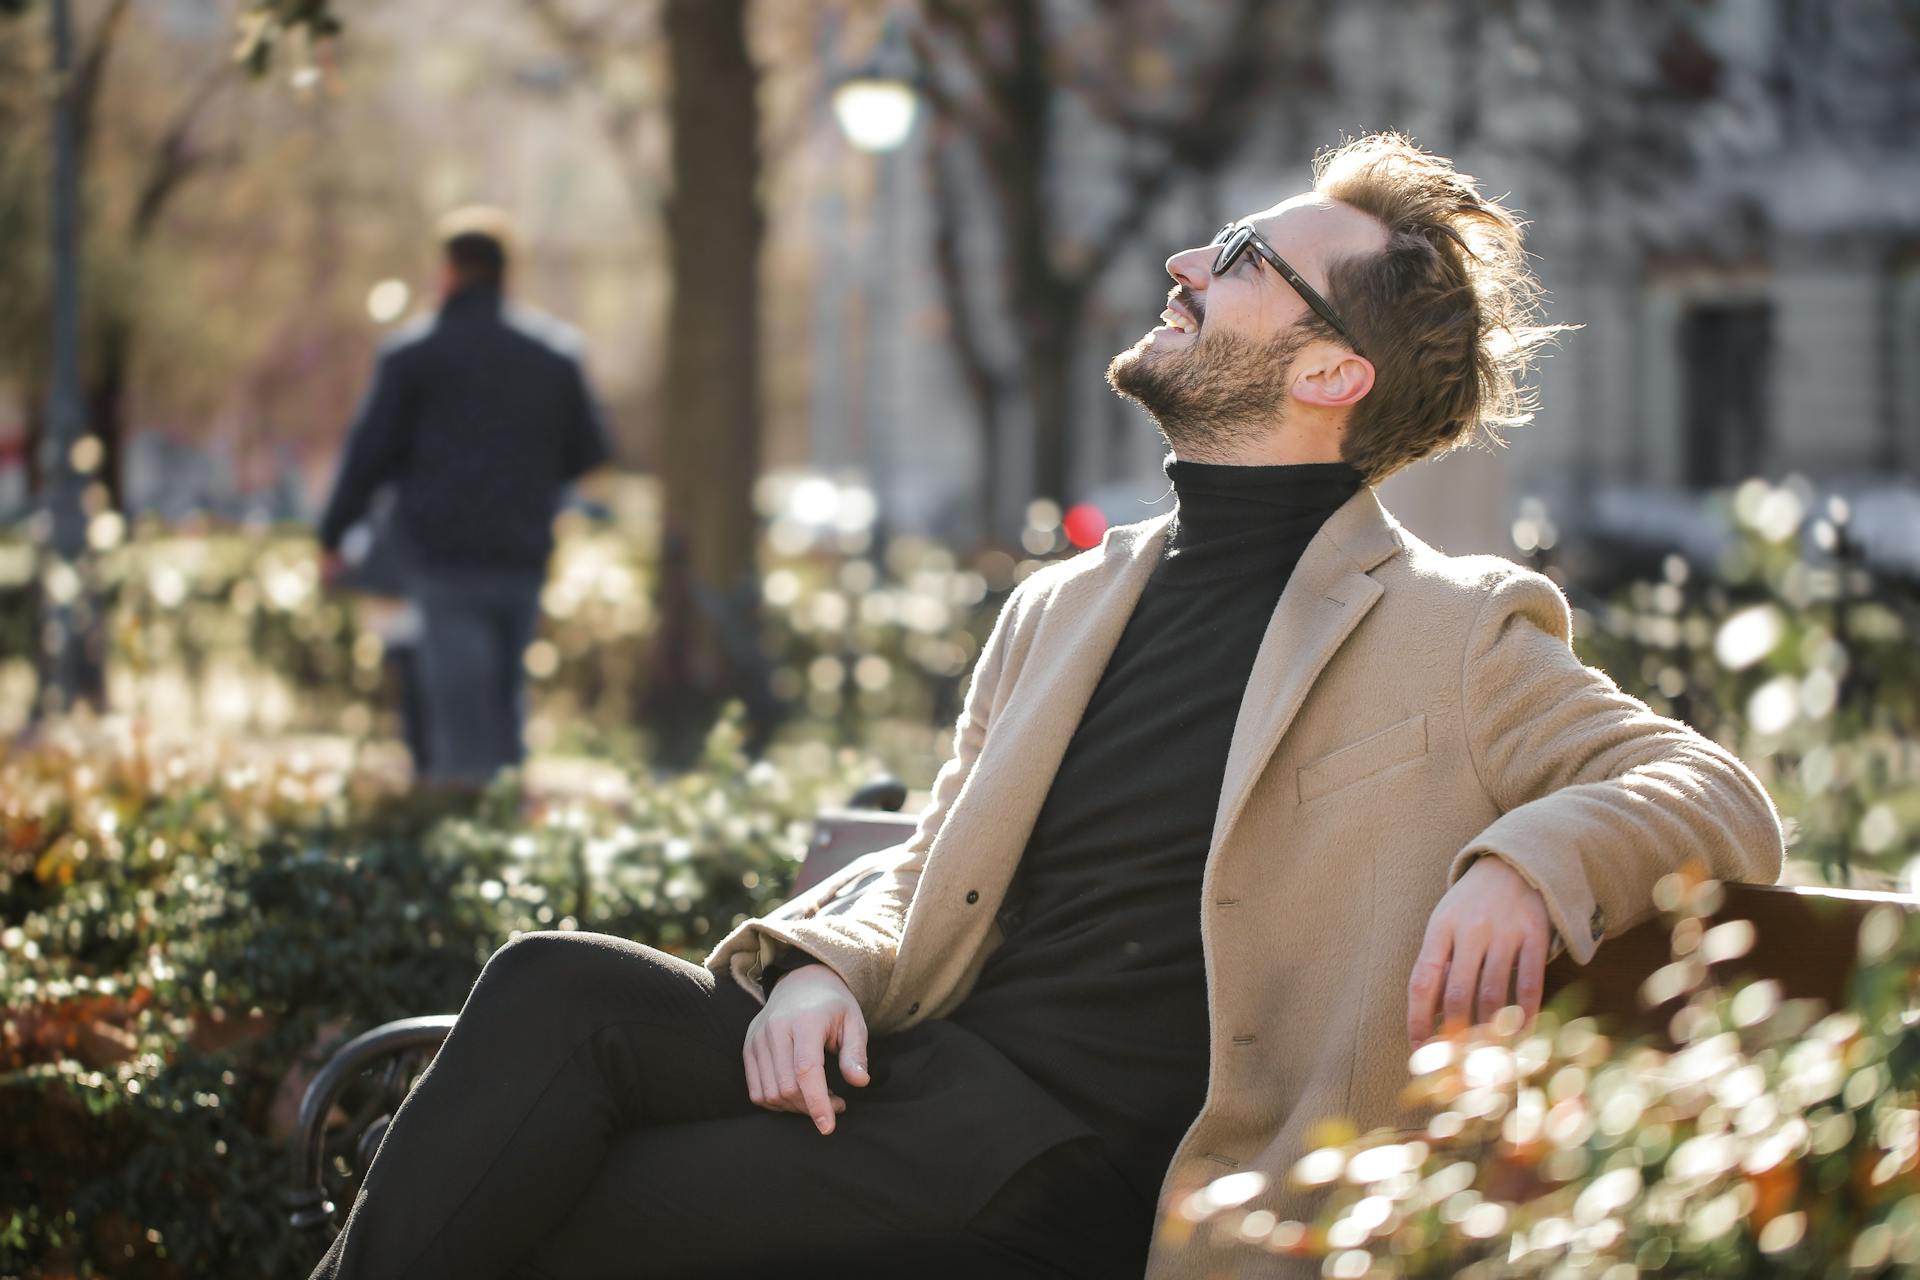 A man sitting on a bench outside | Source: Pexels